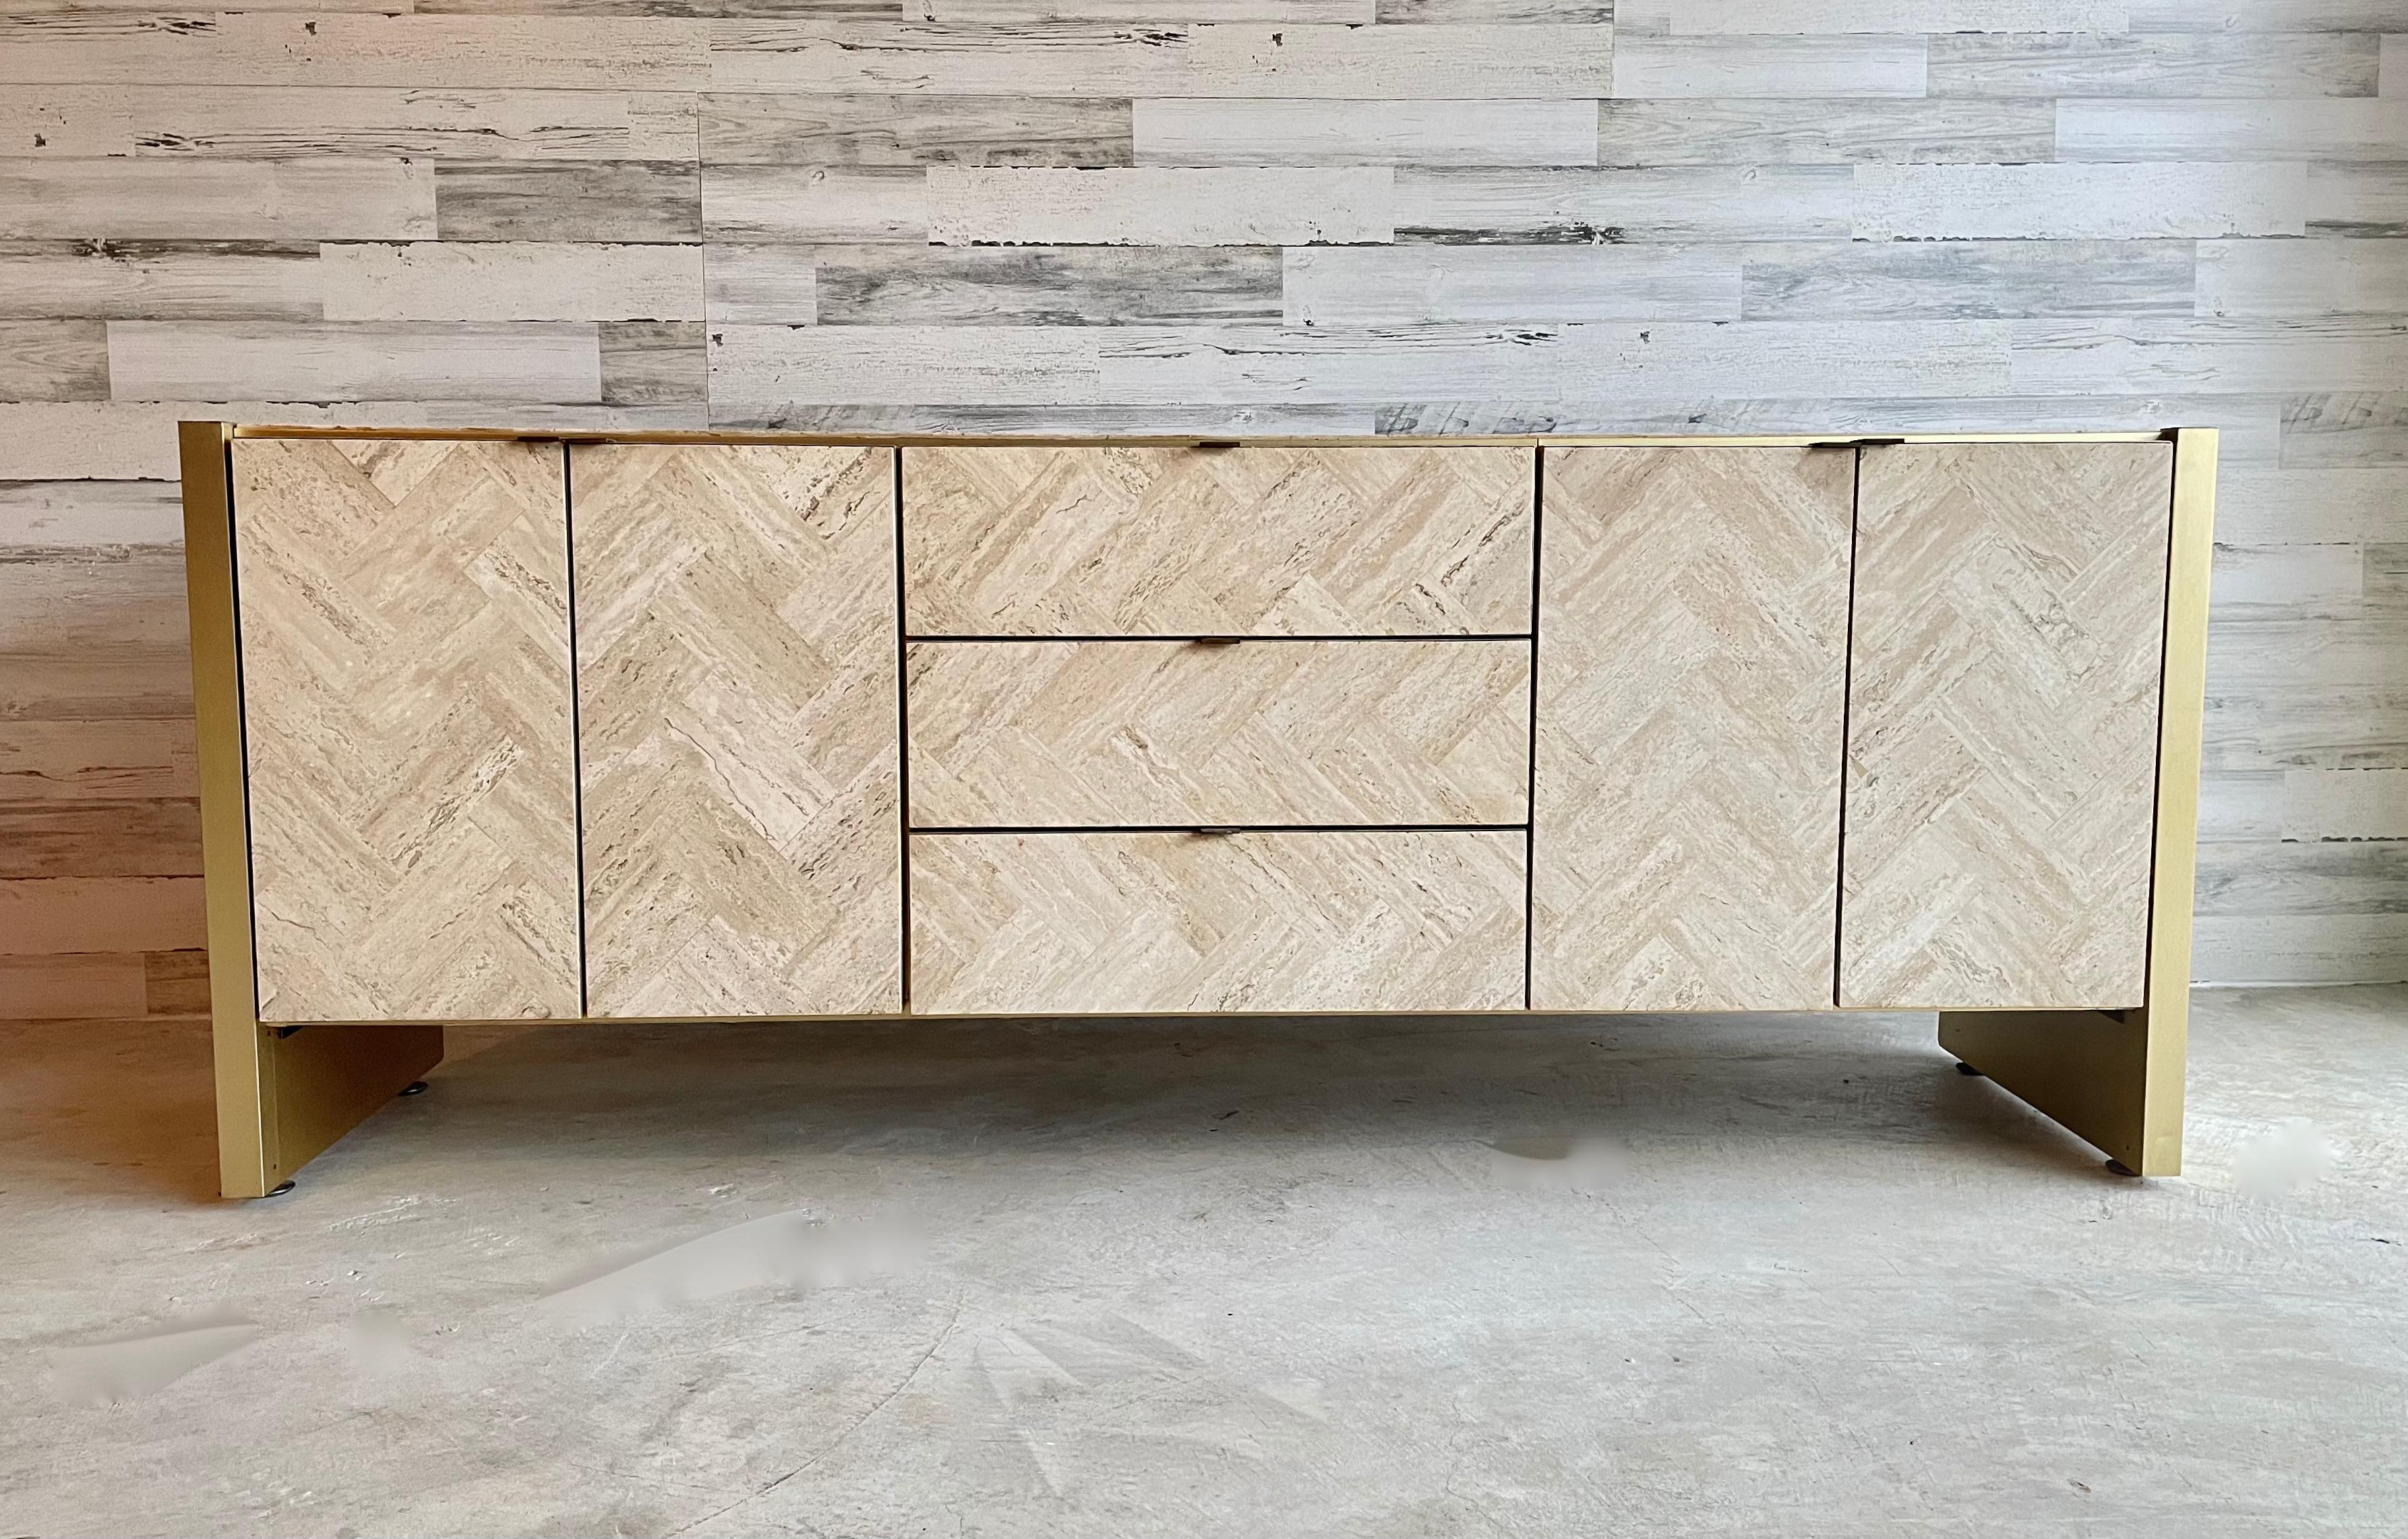 Ello travertine and brushed brass credenza / sideboard. Adjustable legs for leveling. Drawers and doors for all kinds of storage. Very good condition for its age. These are very rare to find!